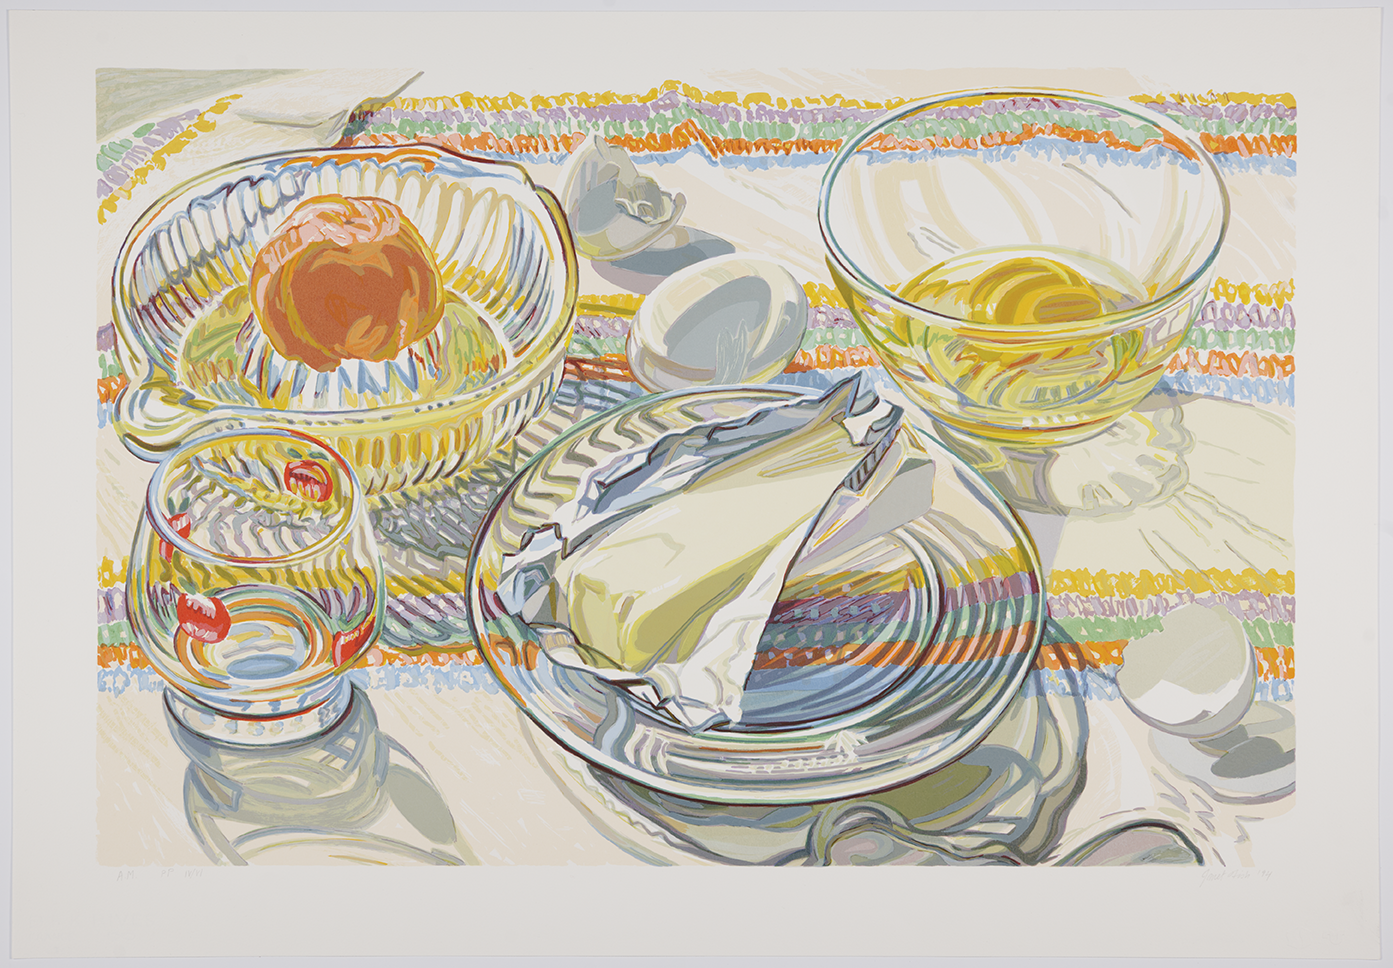 Janet Fish, A.M., 1994, screenprint. Collection of the Kalamazoo Institute of Arts; James A. Breidenstein Art Acquisition Fund purchase, 2016.14 